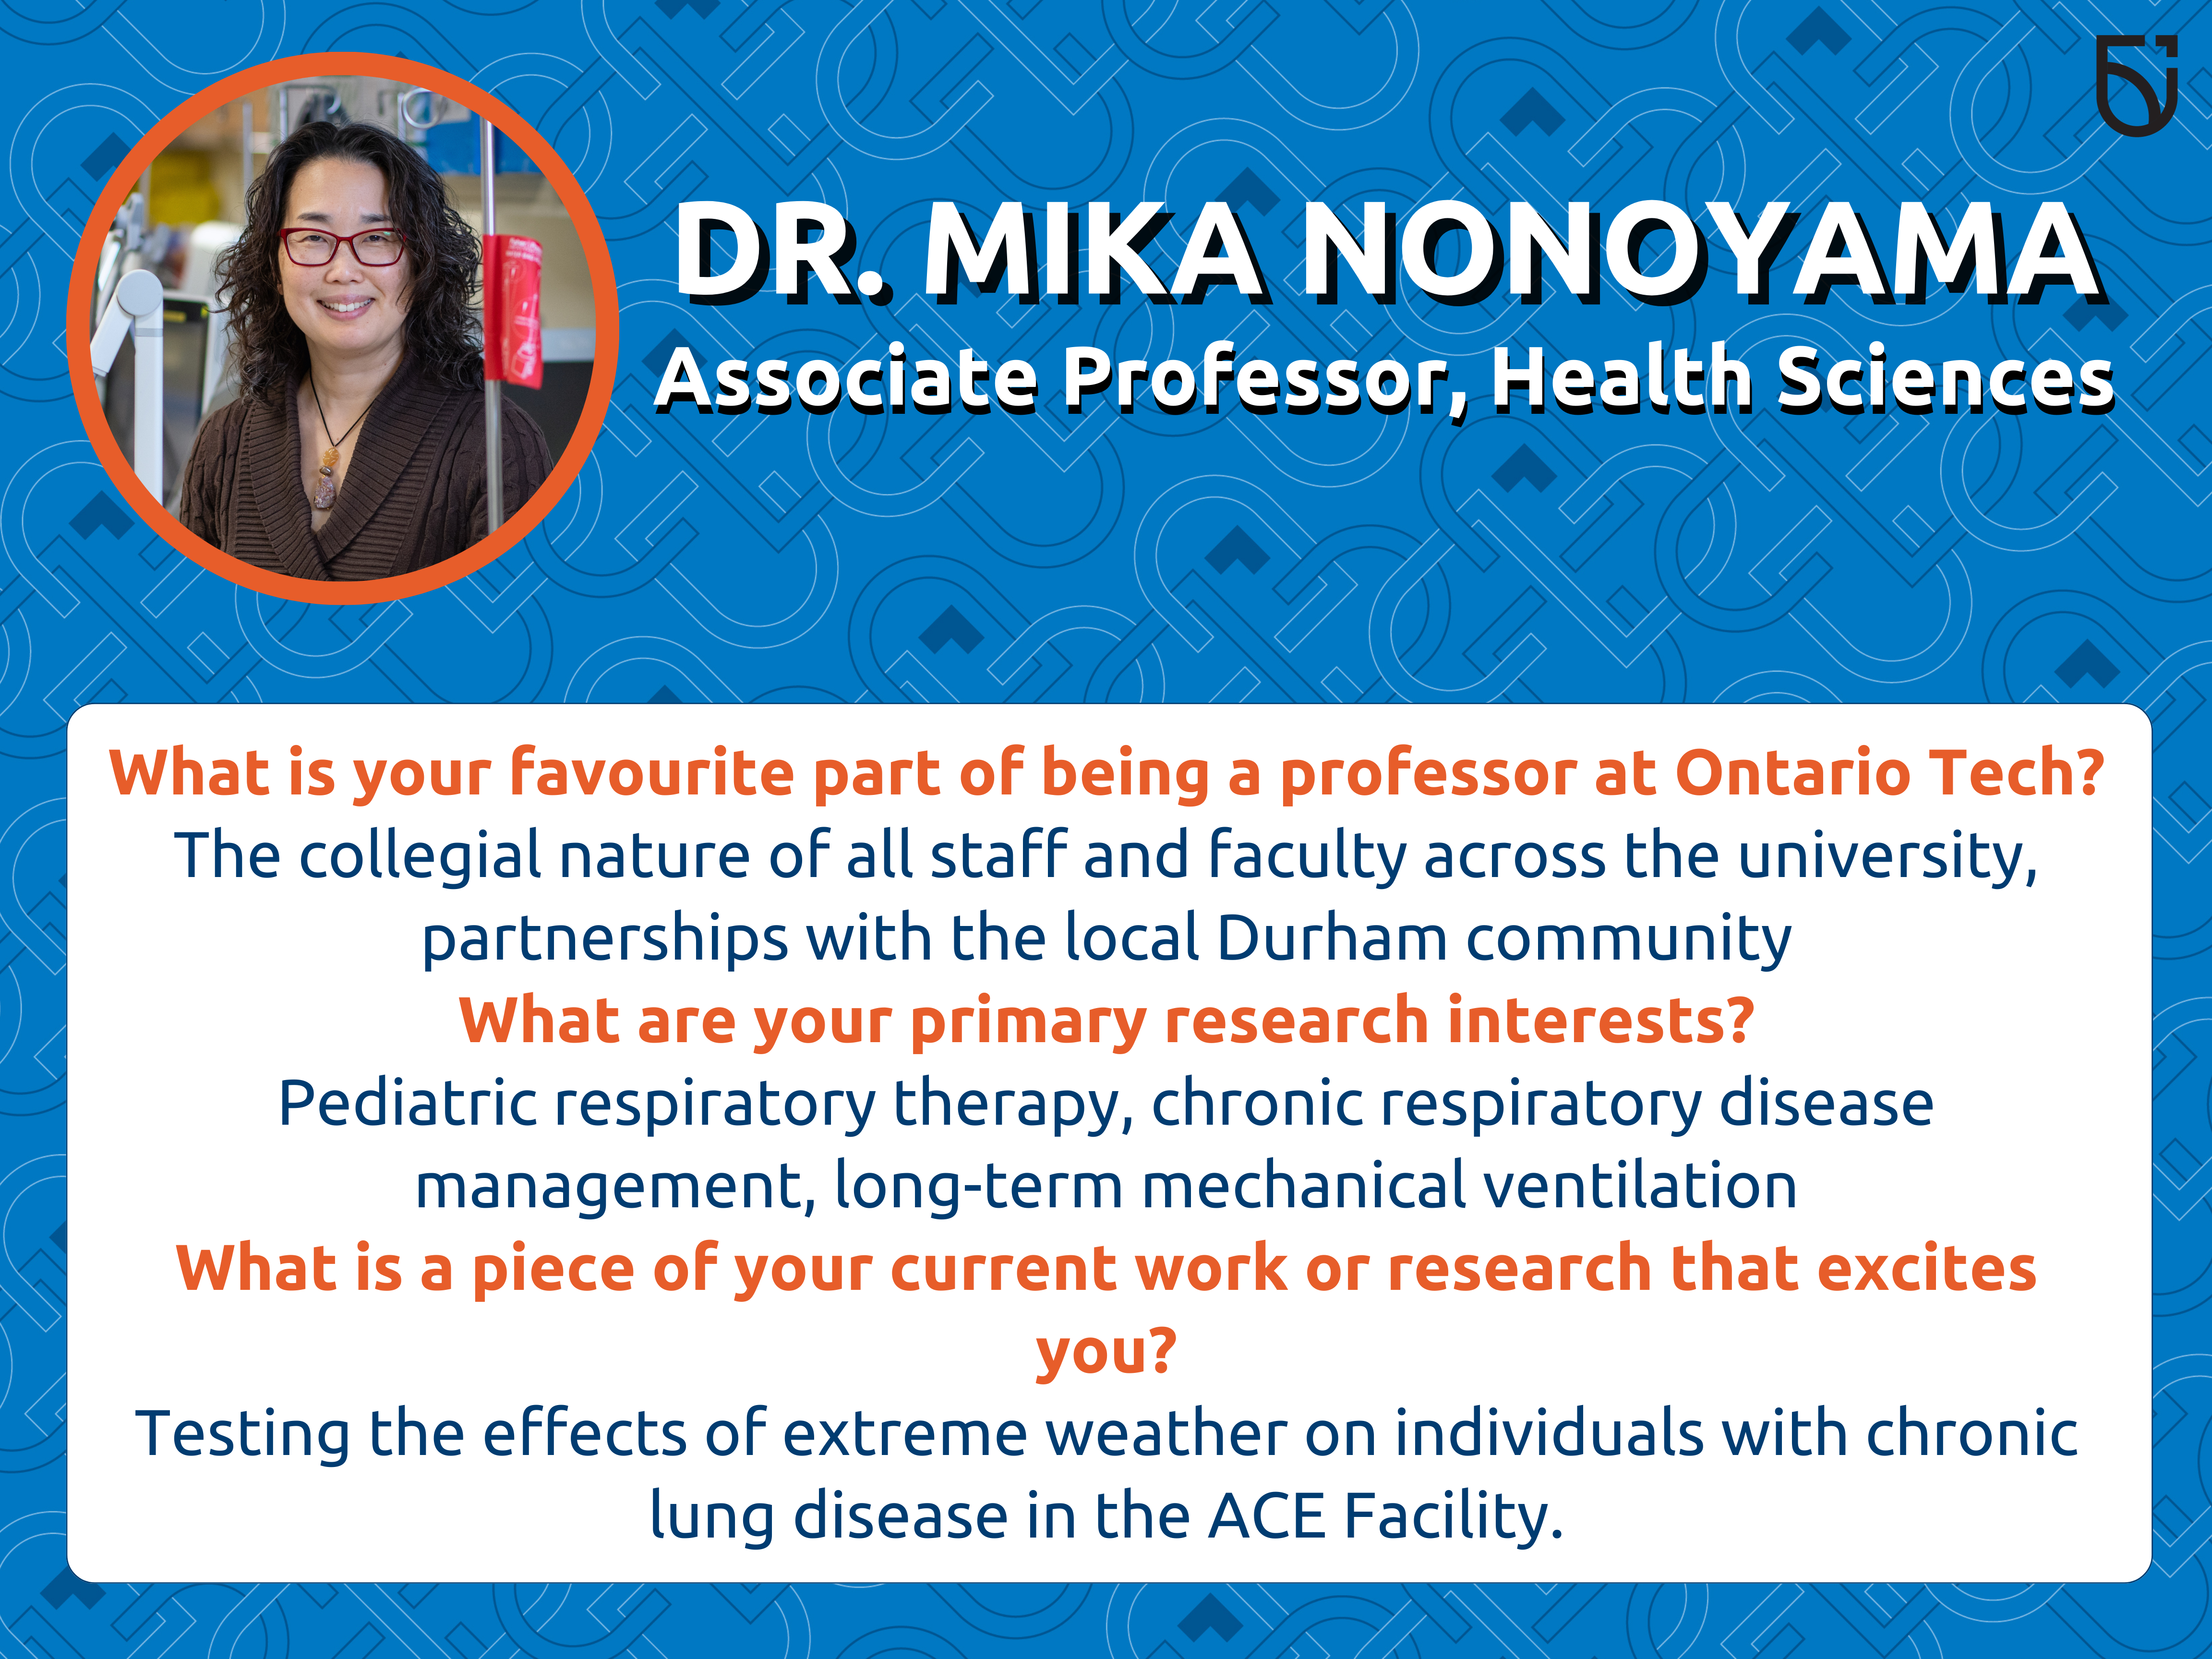 This photo is a Women’s Wednesday feature of Dr. Nonoyama, an Associate Professor in the Faculty of Health Sciences.